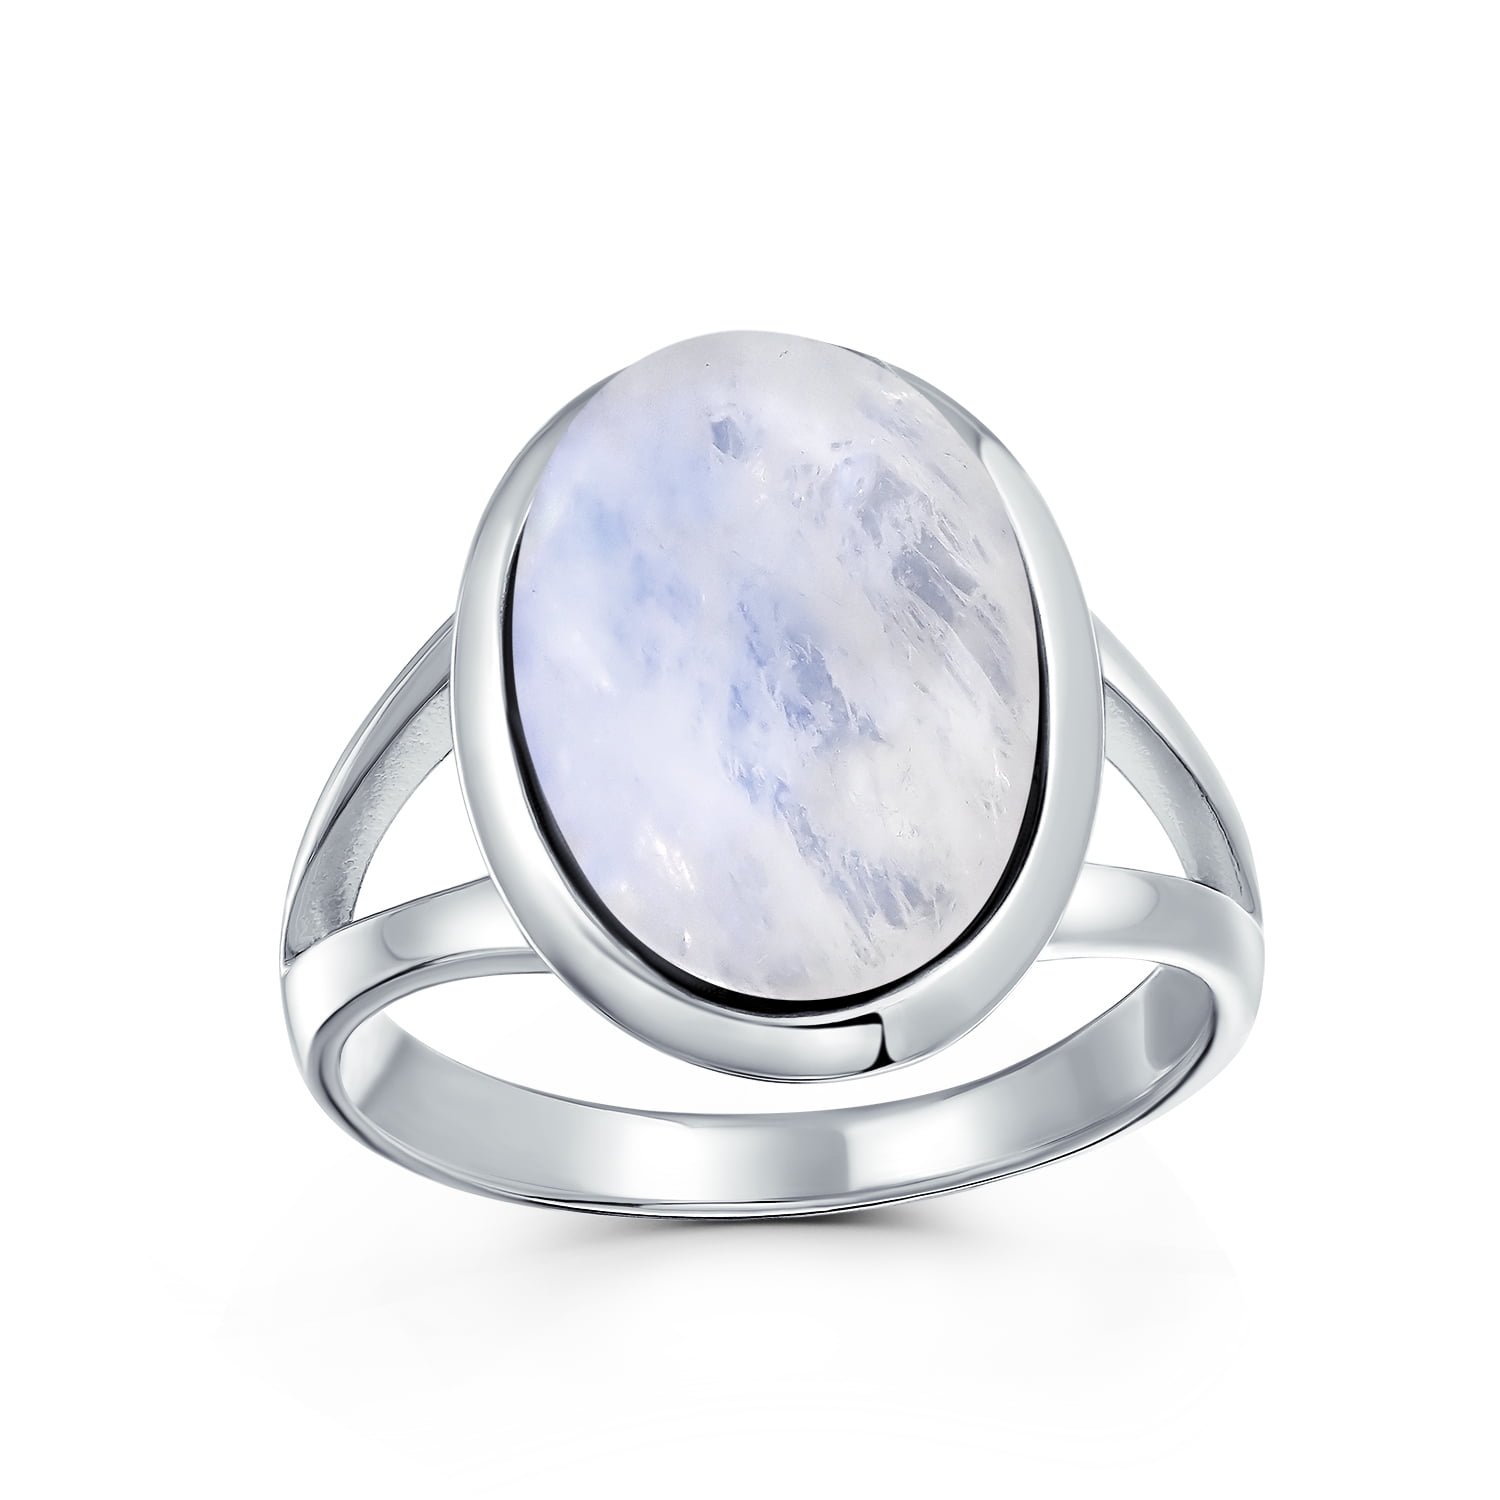 Natural Moonstone Ring Designer Ring Oval Cut Stone Ring Amazing Women Ring 925 Sterling Silver Ring Christmas Sale Gemstone Ring